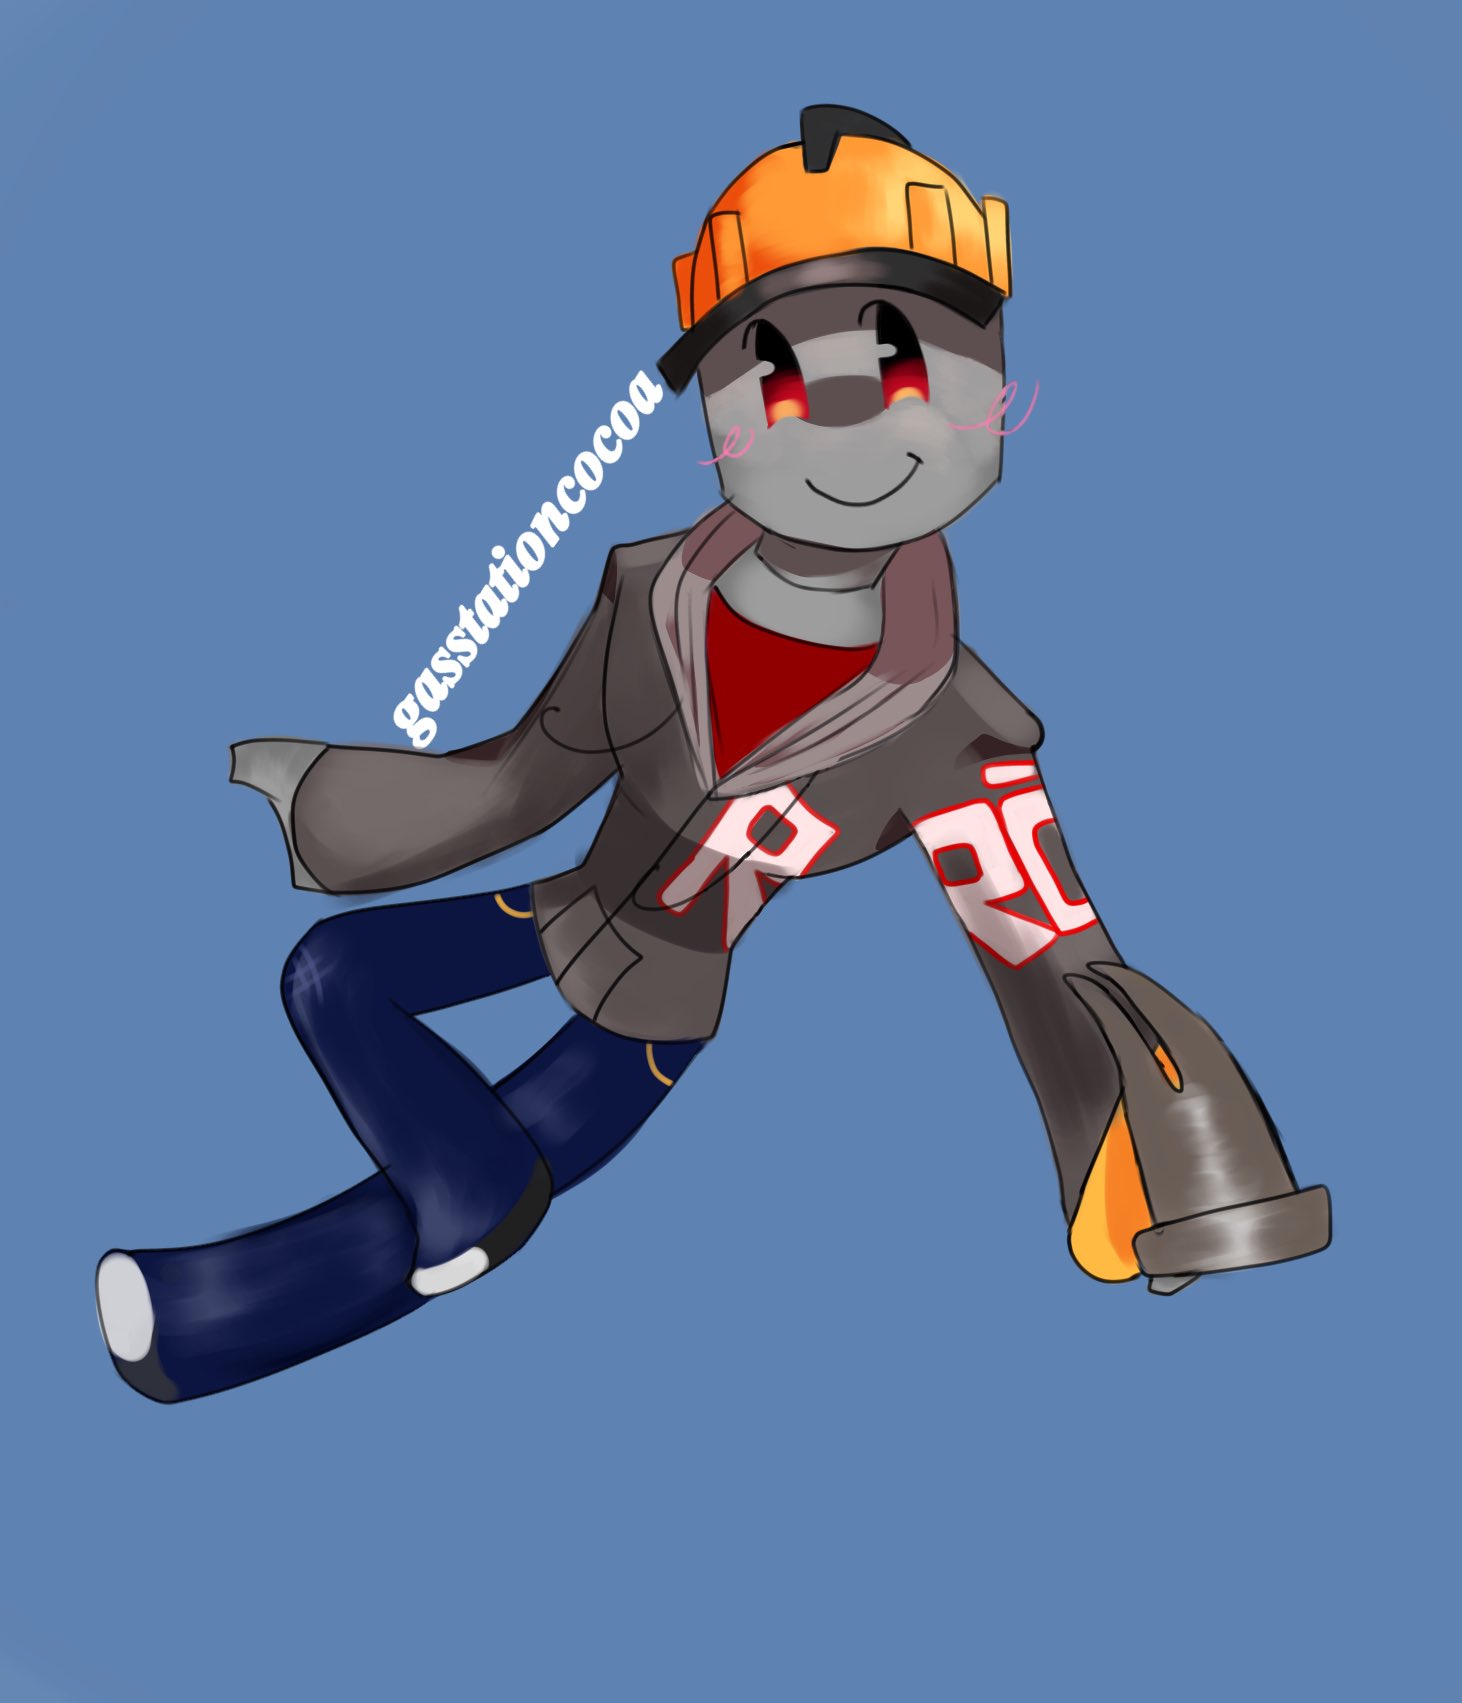 ROBLOX JUST CHANGED BUILDERMAN'S OUTFIT 